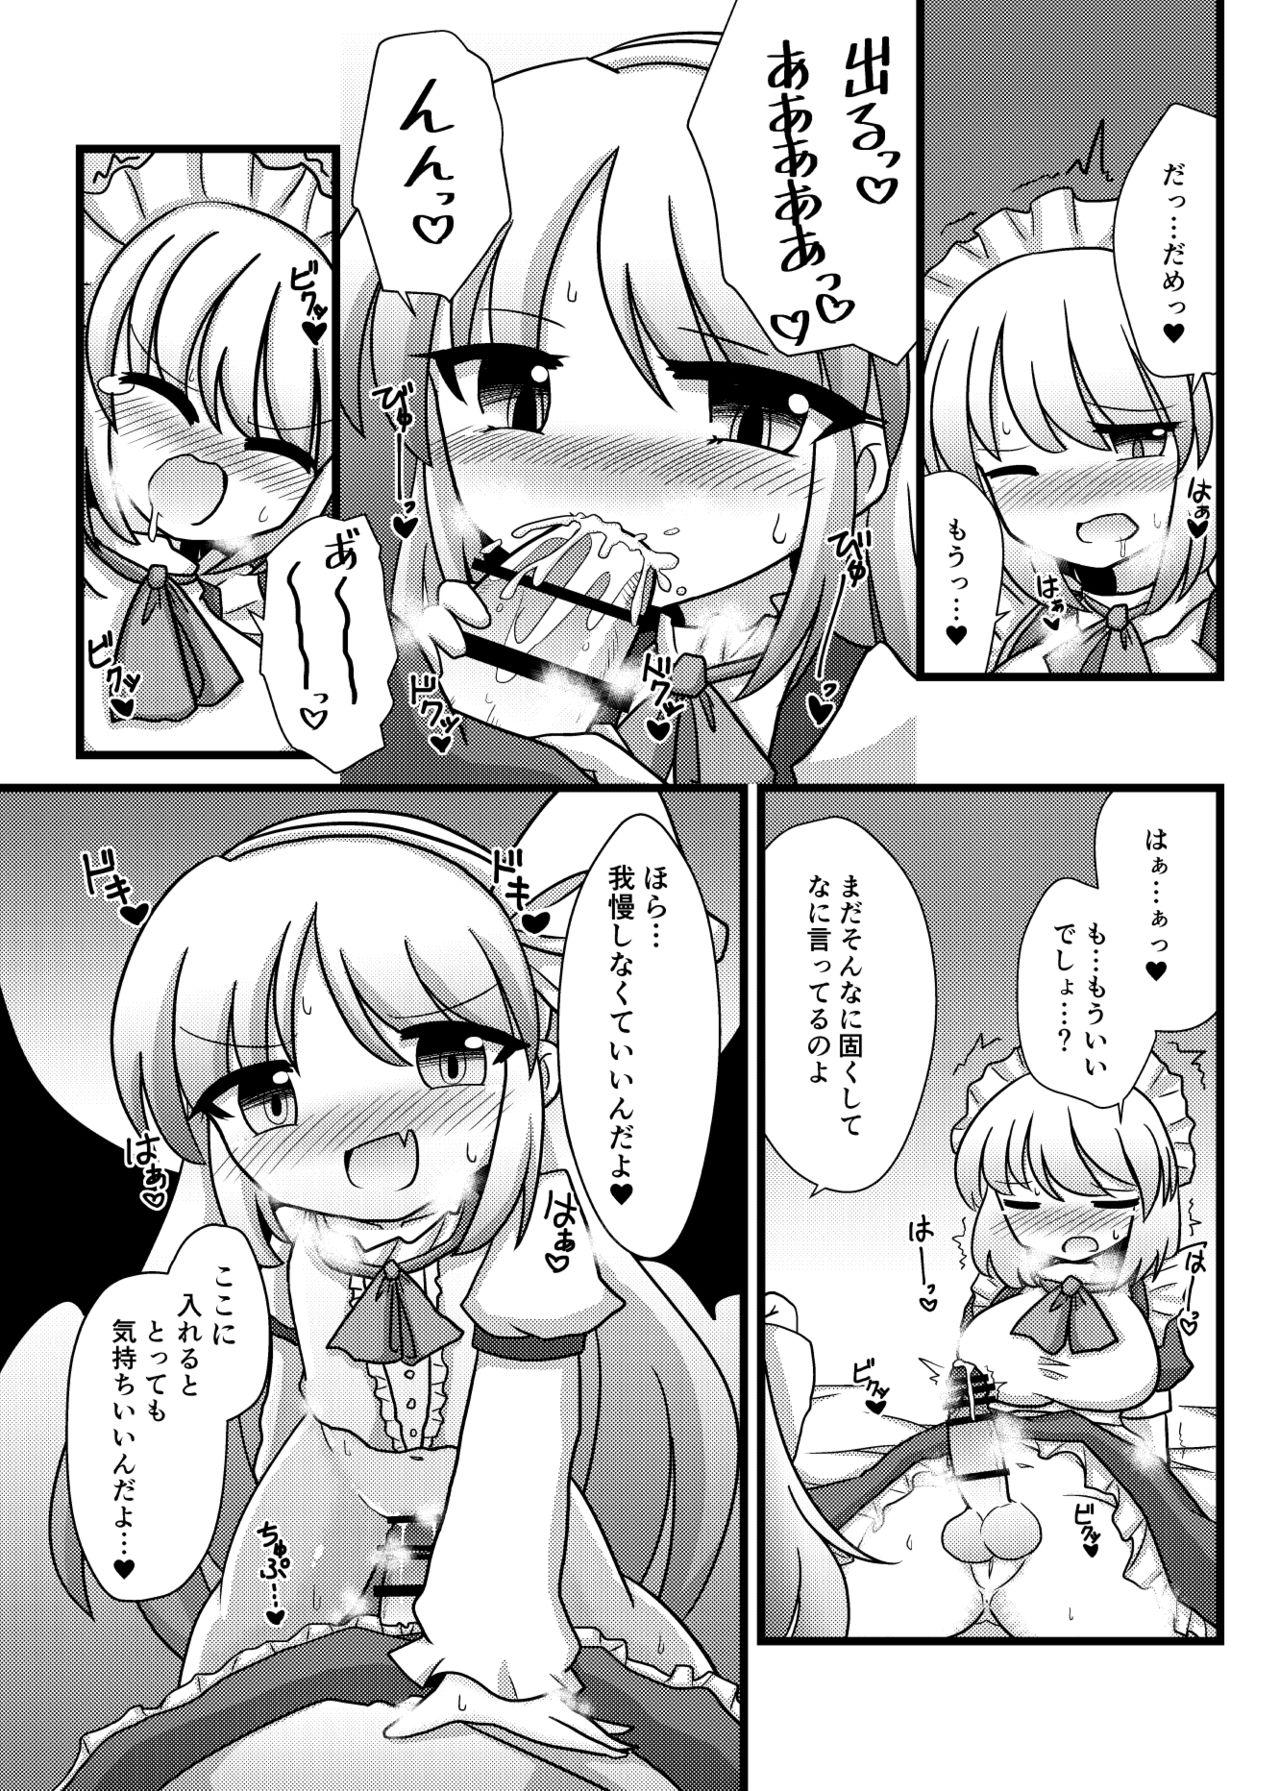 Roughsex 旧作エロ合同に寄稿した漫画 - Touhou project Throat Fuck - Page 3